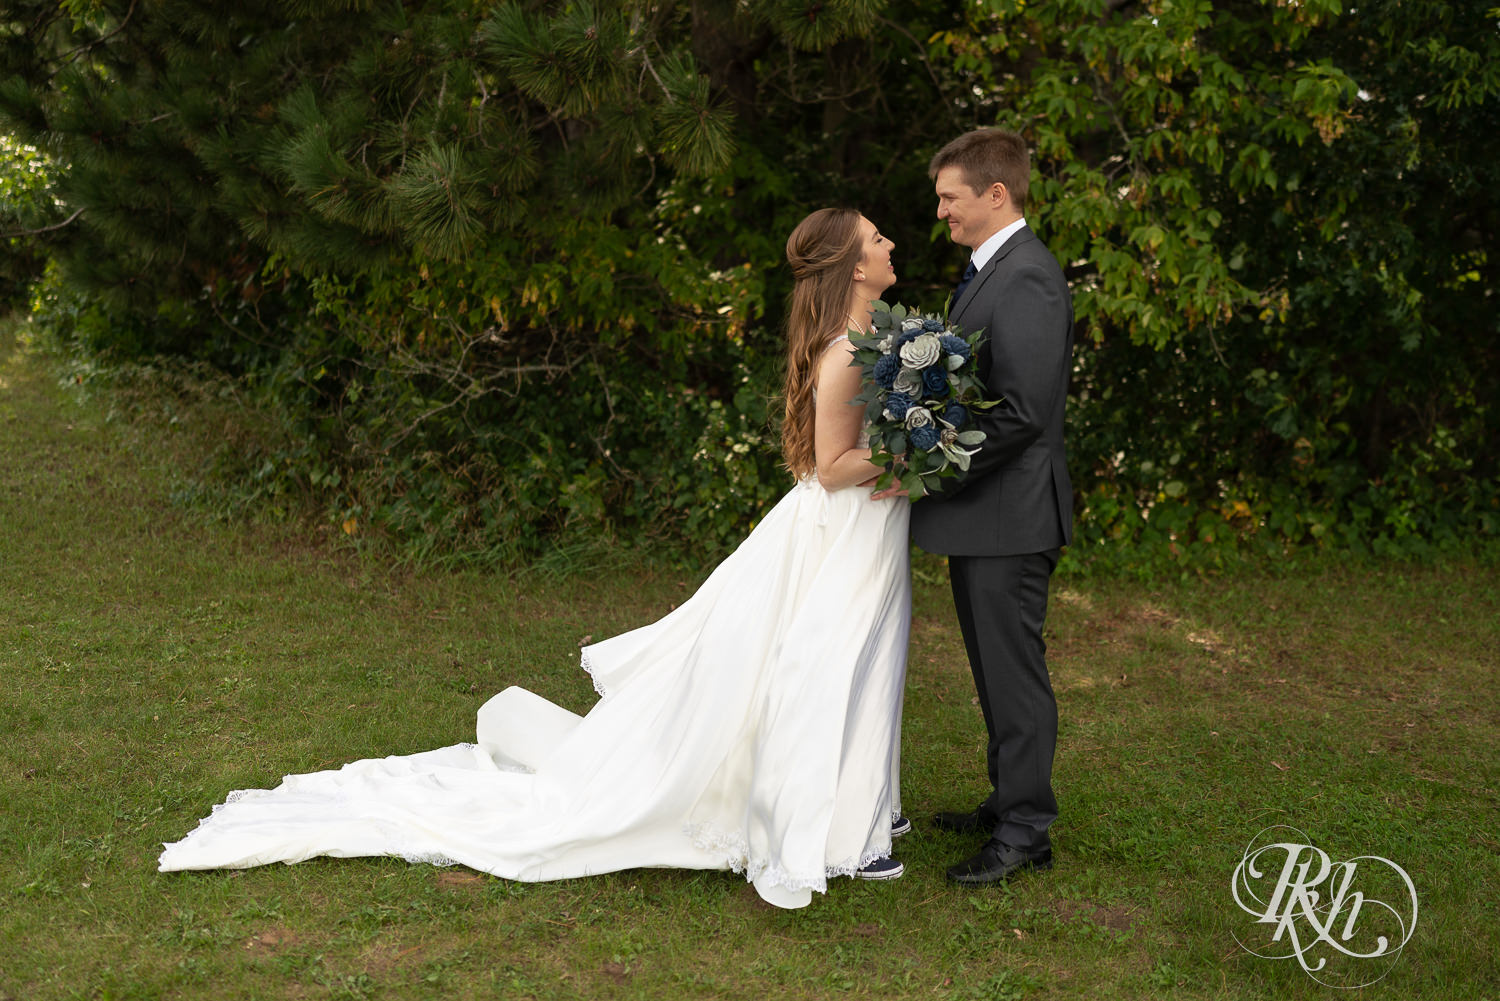 First look at a summer wedding at Stone Lion Winery and Events in Isanti, Minnesota. 